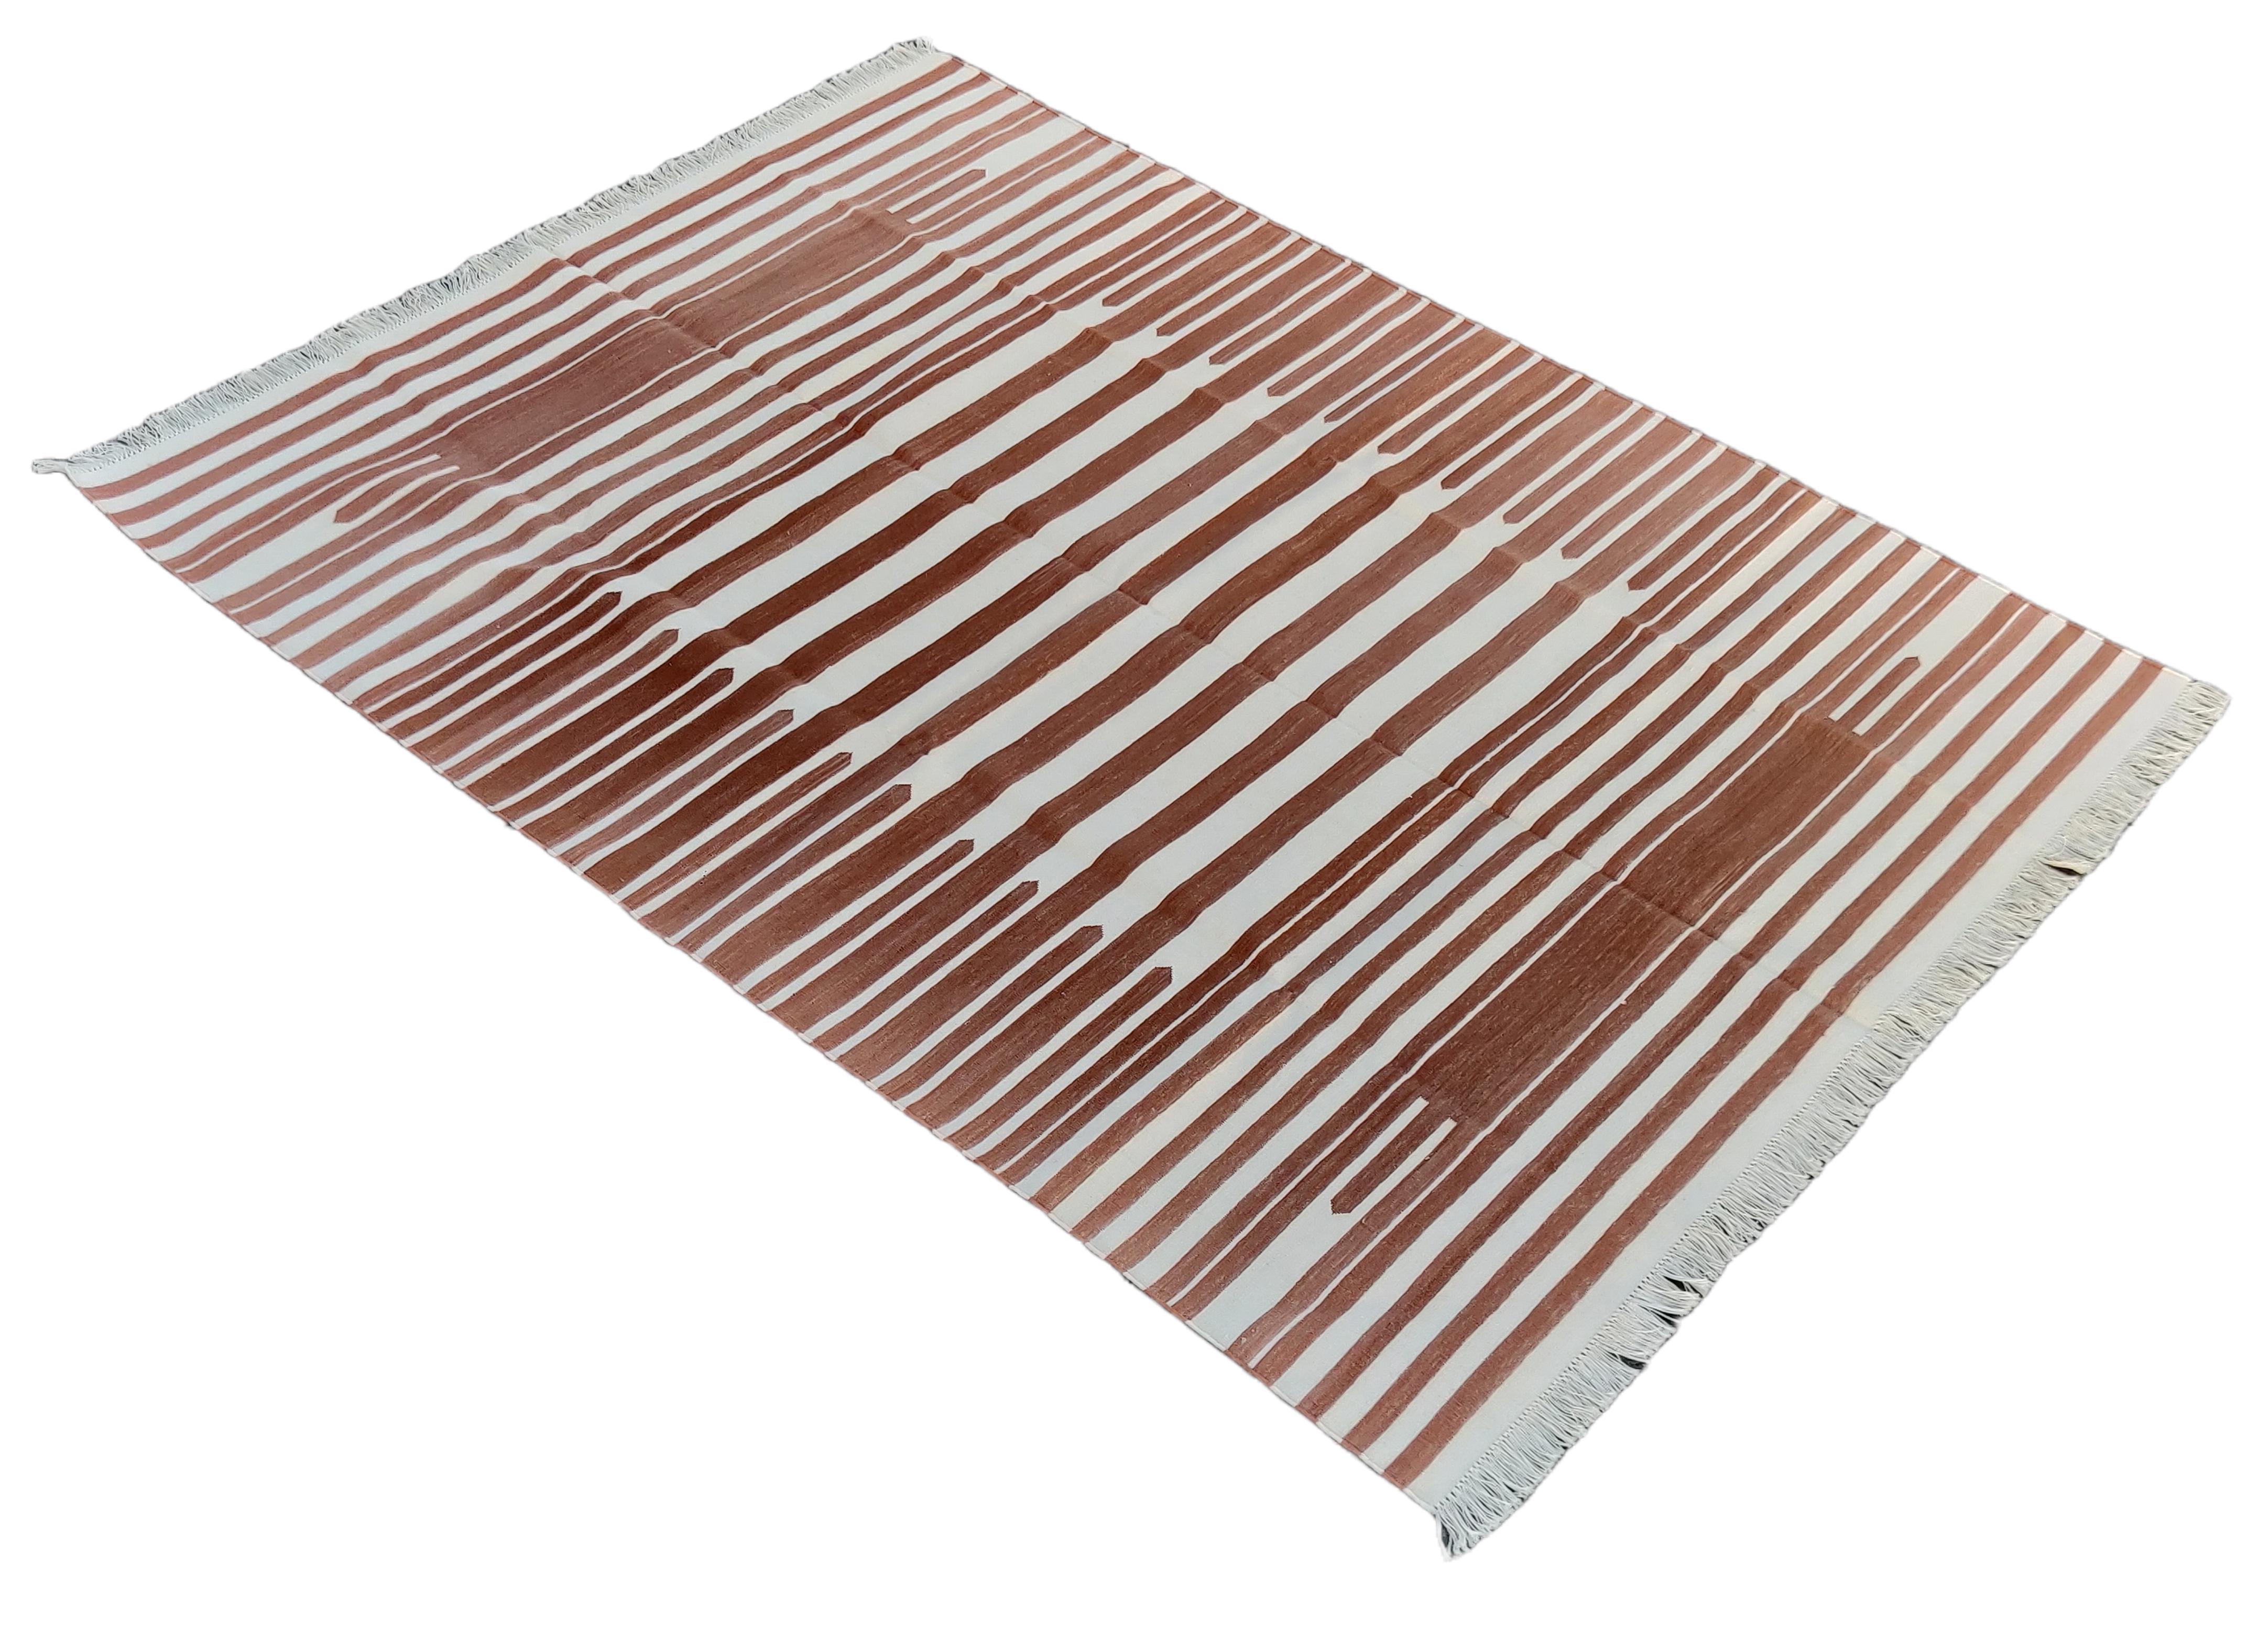 Handmade Cotton Area Flat Weave Rug, 5x7 Tan And White Striped Indian Dhurrie For Sale 3